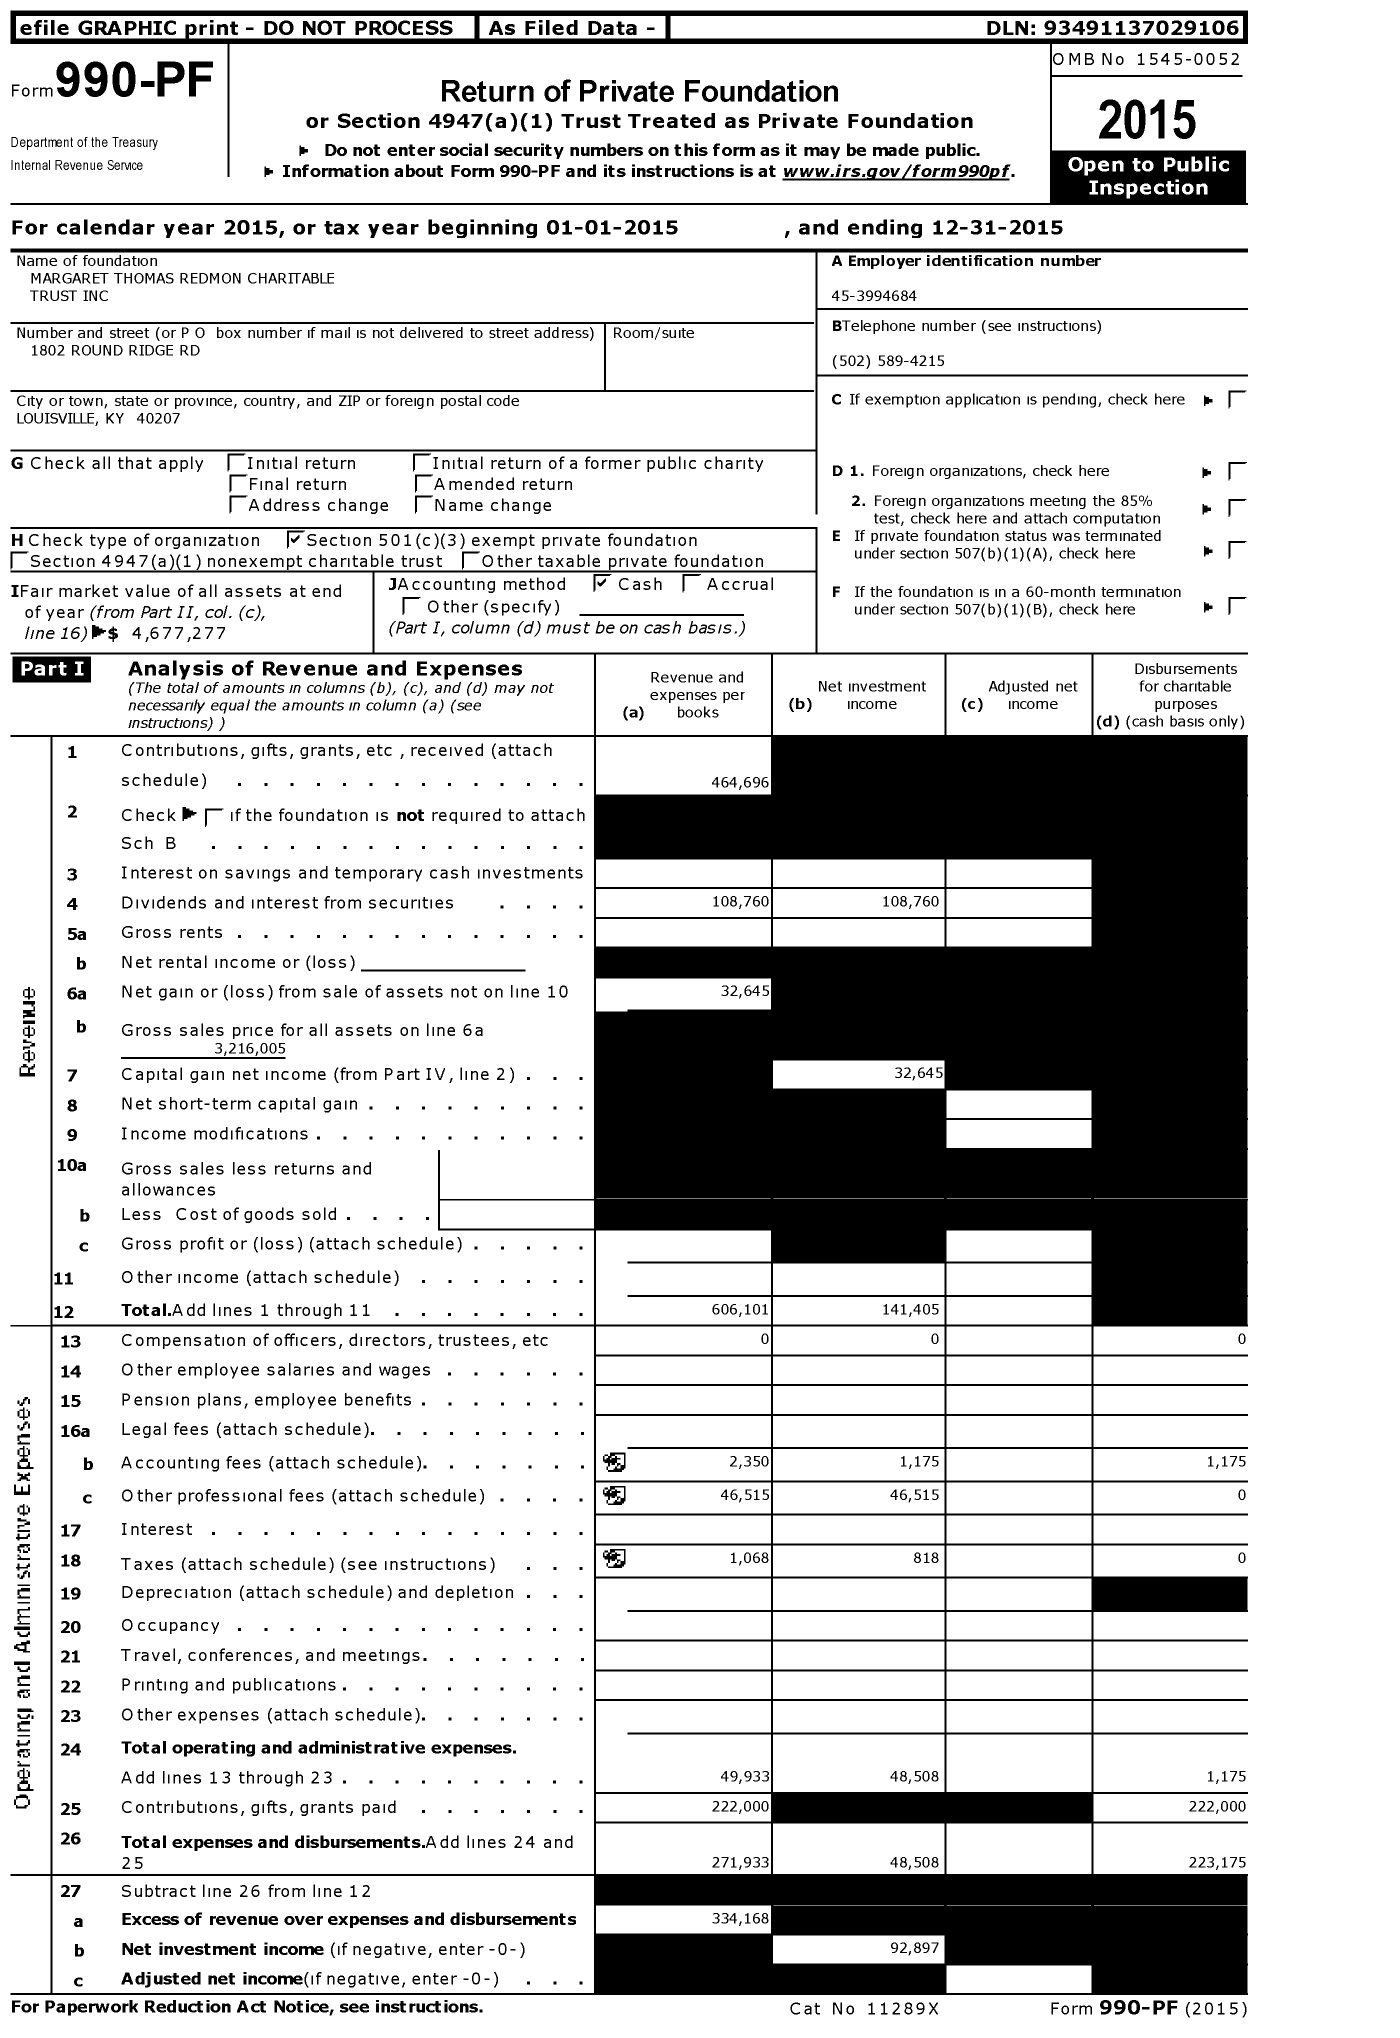 Image of first page of 2015 Form 990PF for Margaret Thomas Redmon Charitable Trust